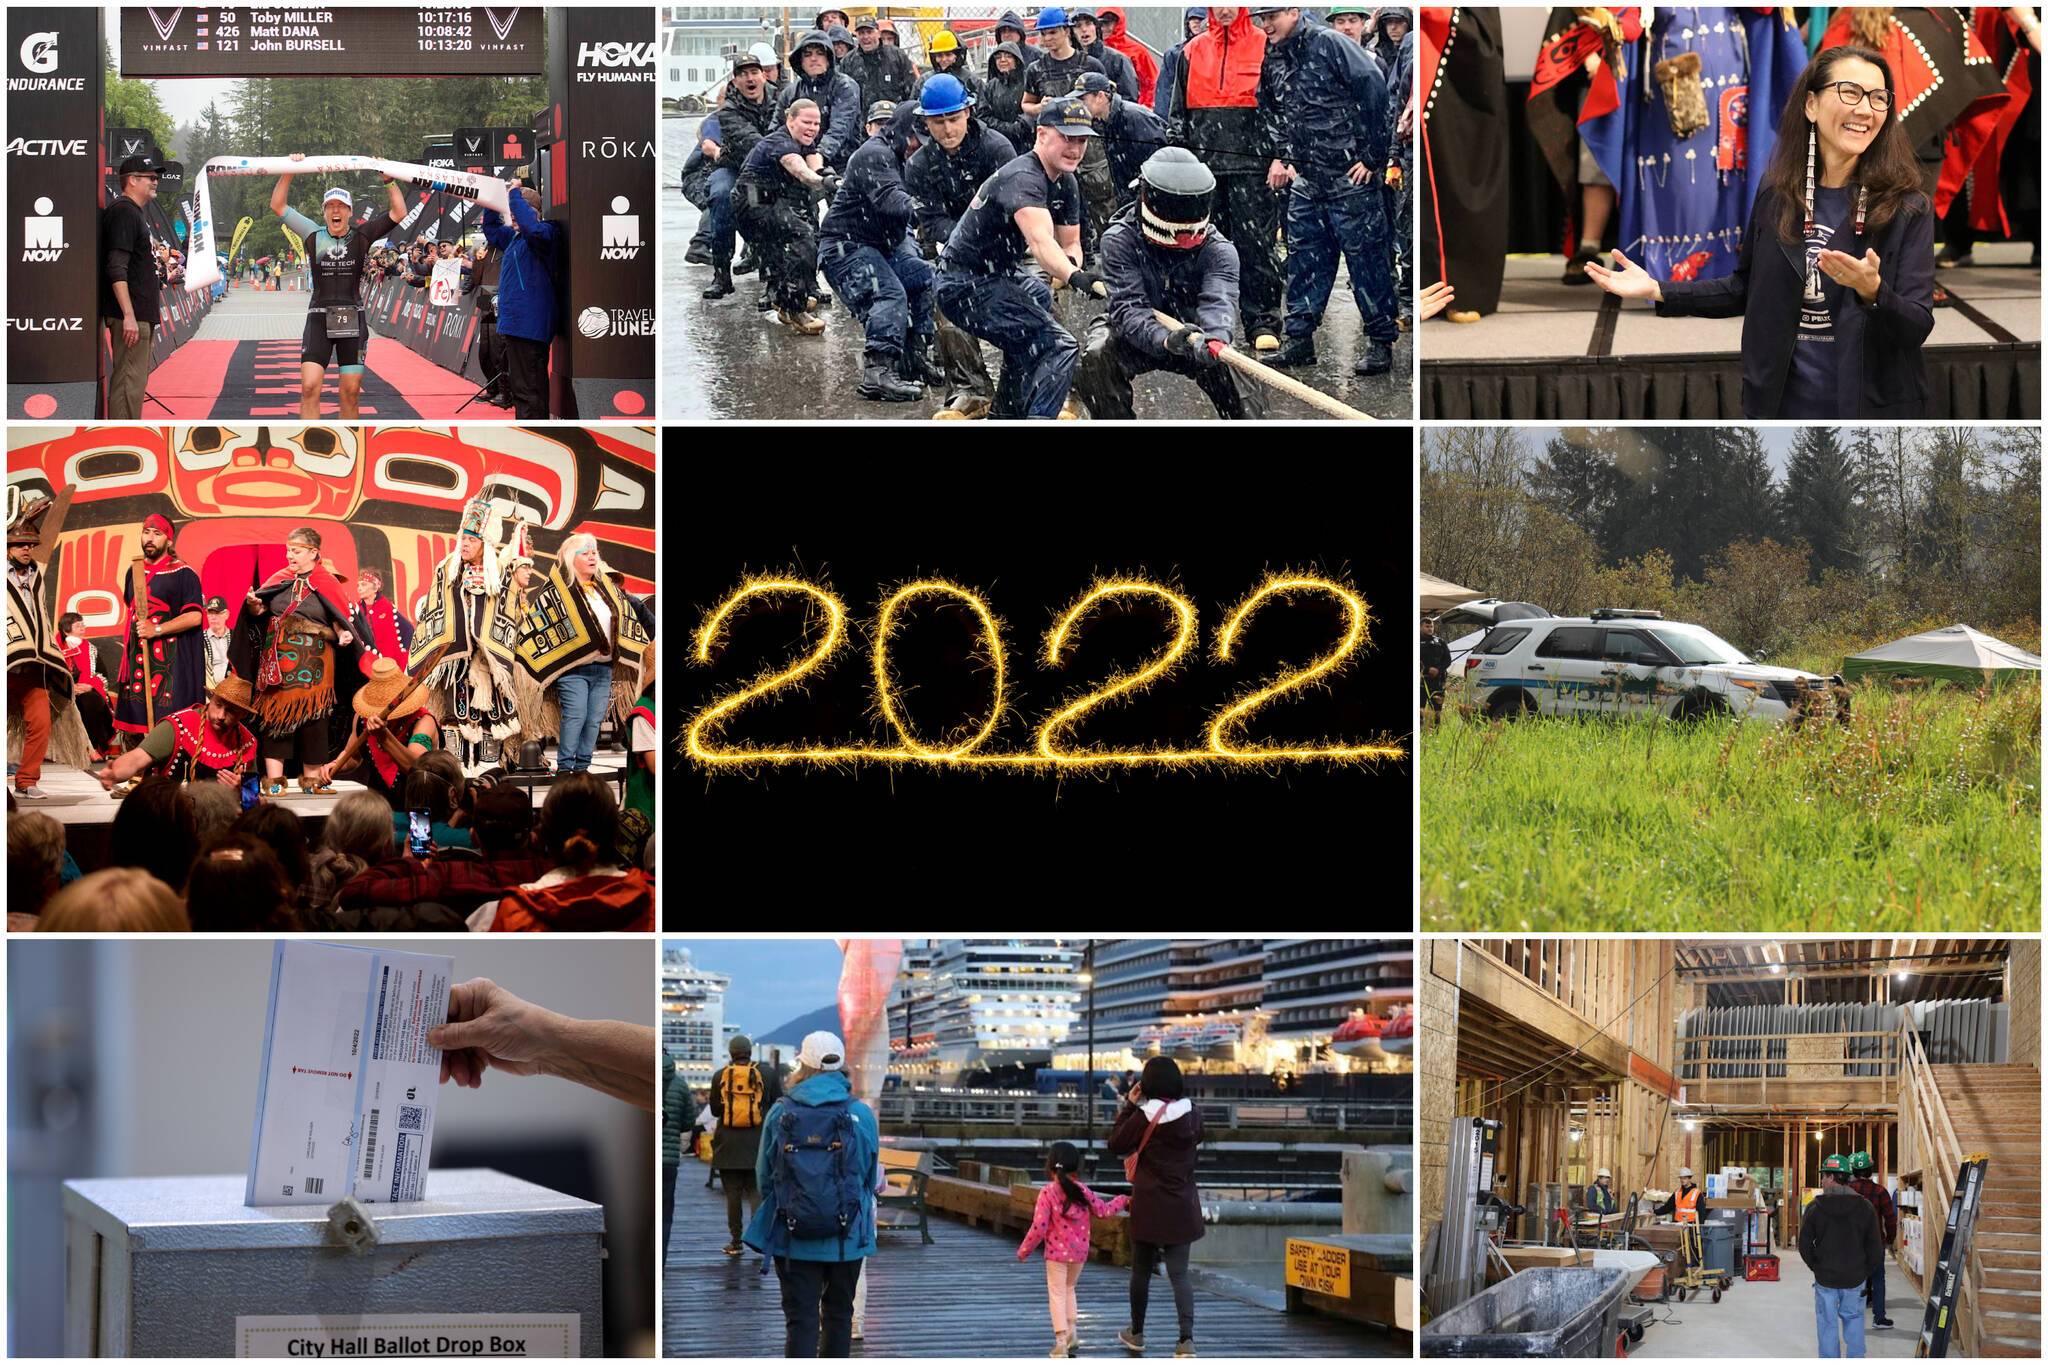 Juneau Empire staff and Unsplash 
Juneau’s biggest news stories of 2022 ranged from historic victories (and Celebrations) to severe struggles due to shortages of workers and housing. Virtually all were connected by overlapping factors to other top stories.